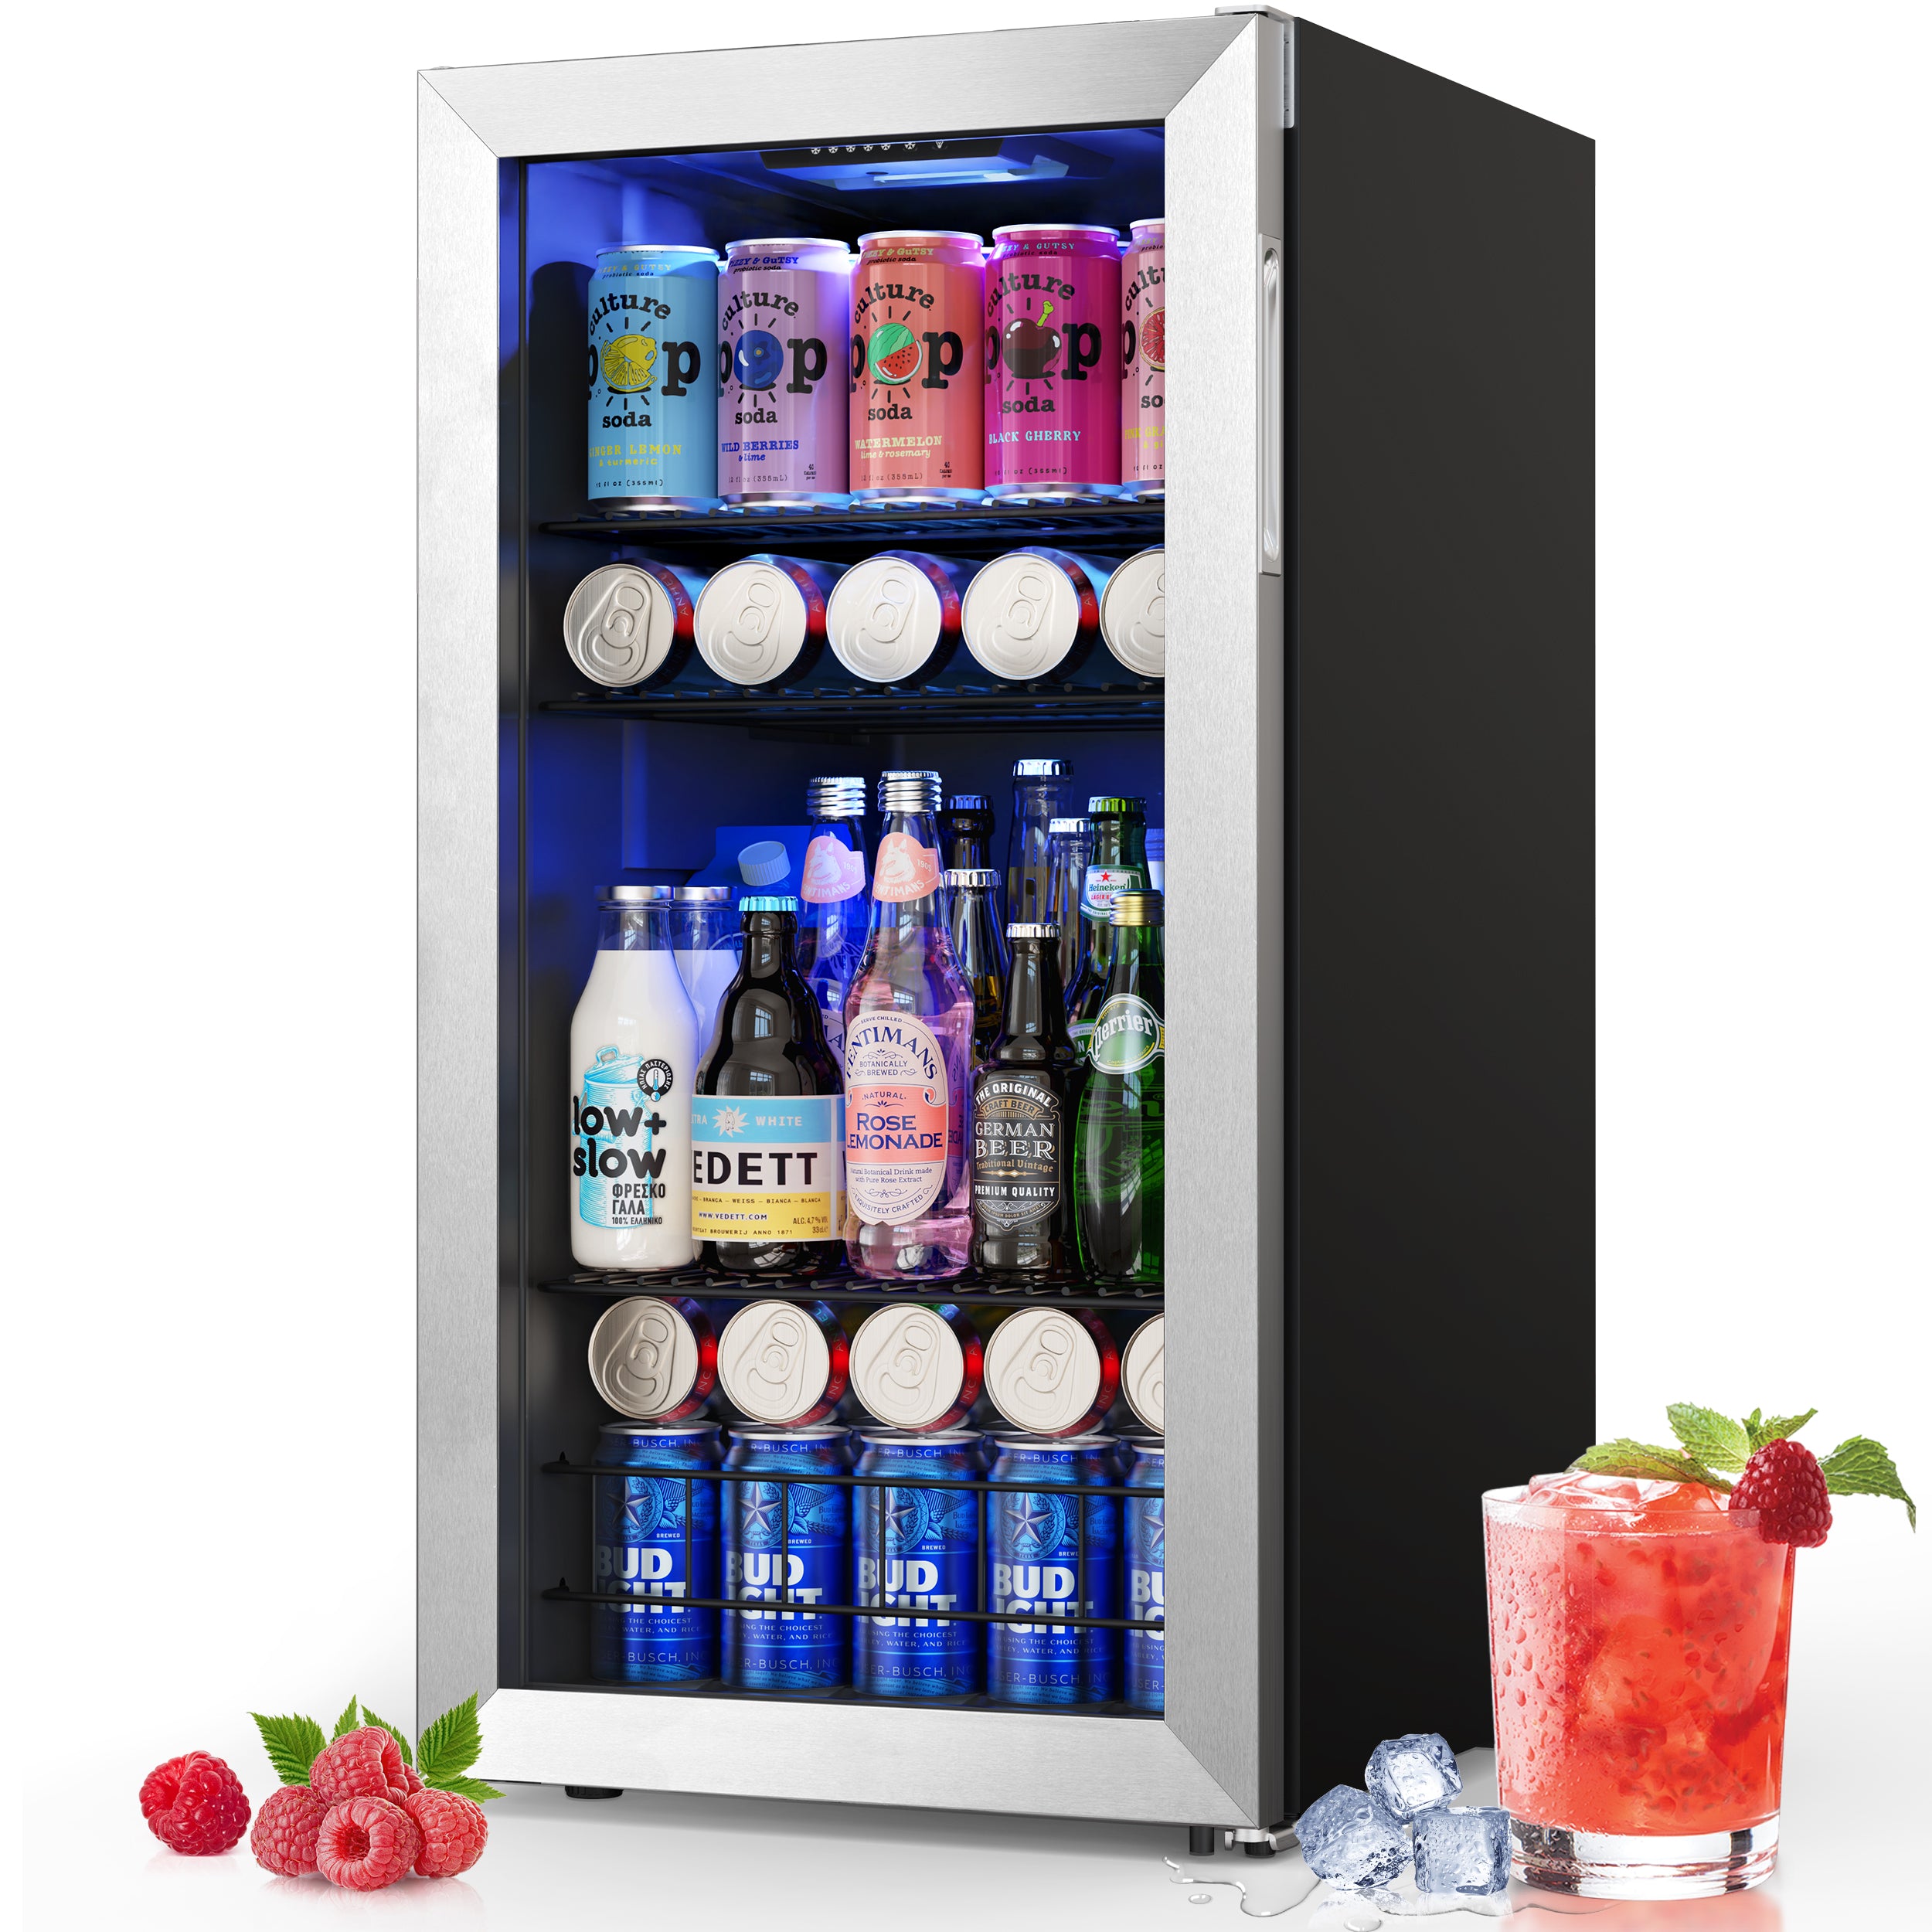 Yeego 17 Inch Wide 121 Cans Narrow Small Beverage Fridge, Shallow Depth Drink Cooler Under Counter, Built-In Or Freestanding